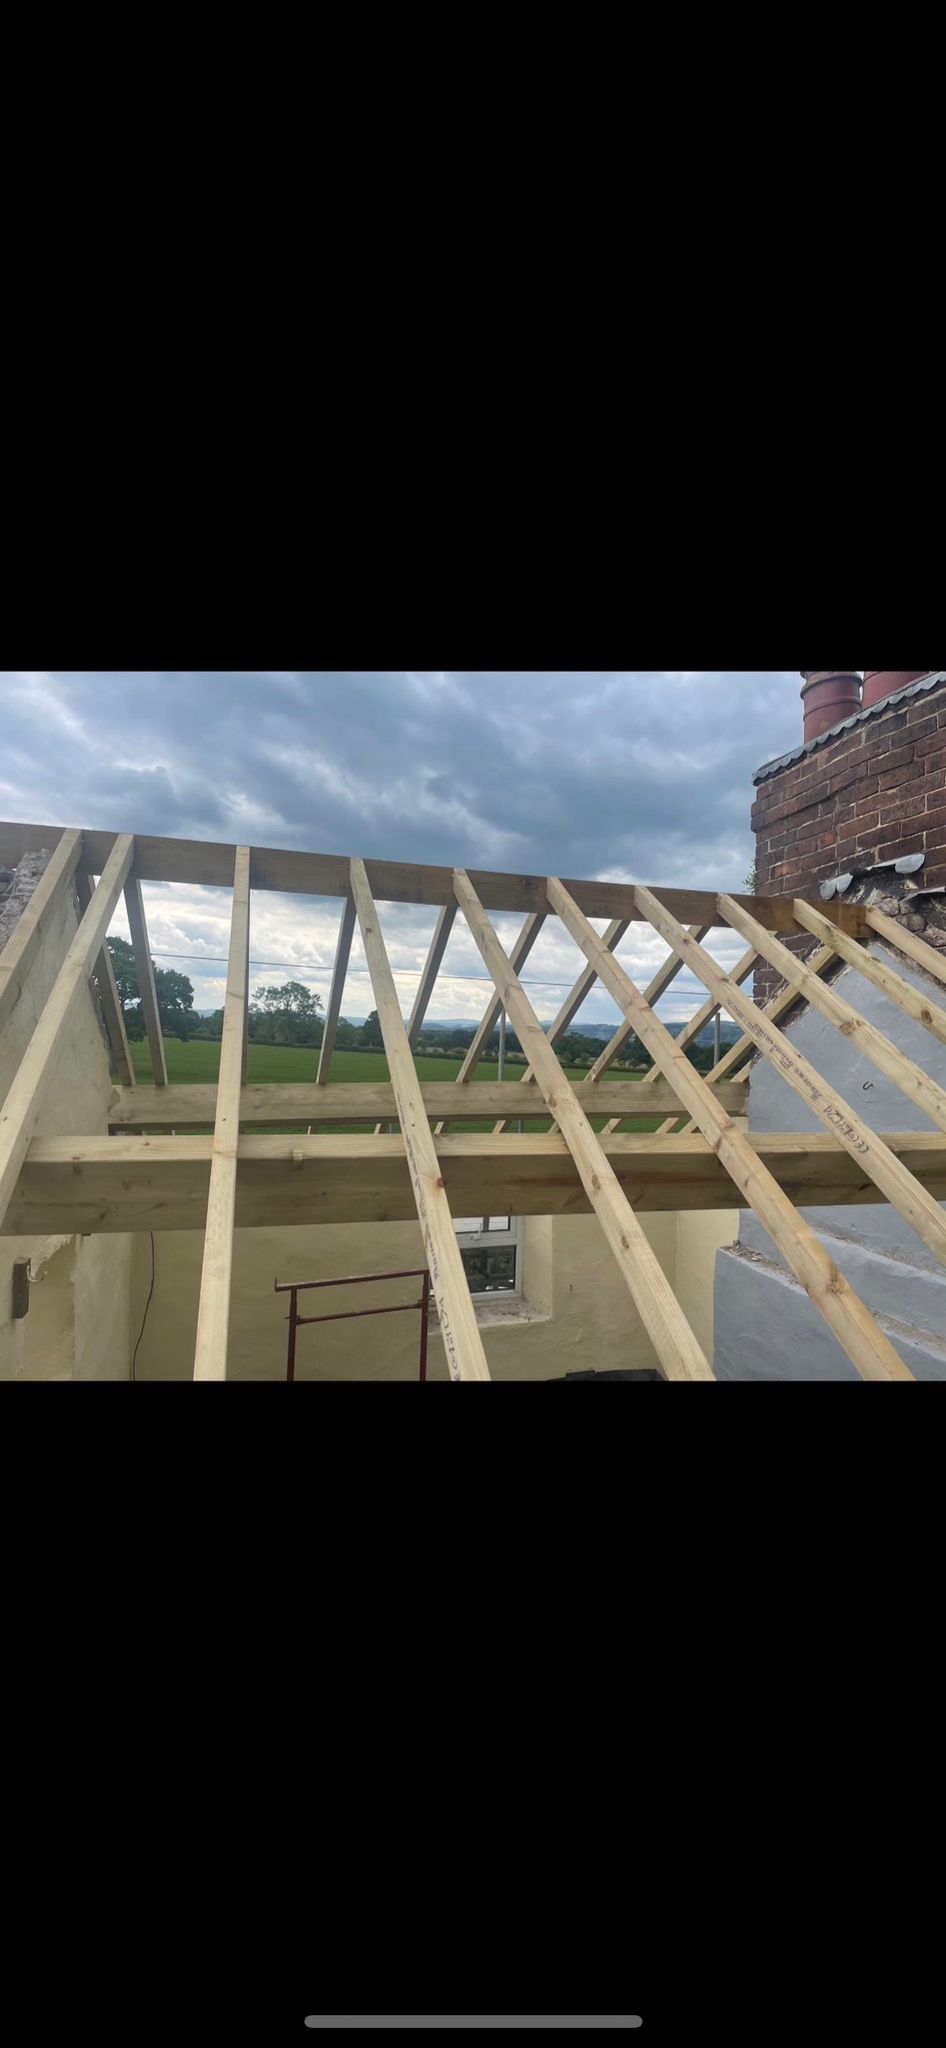 Timberwork Roof Contractors Llanynghenedl, LL65 - DD Roofing